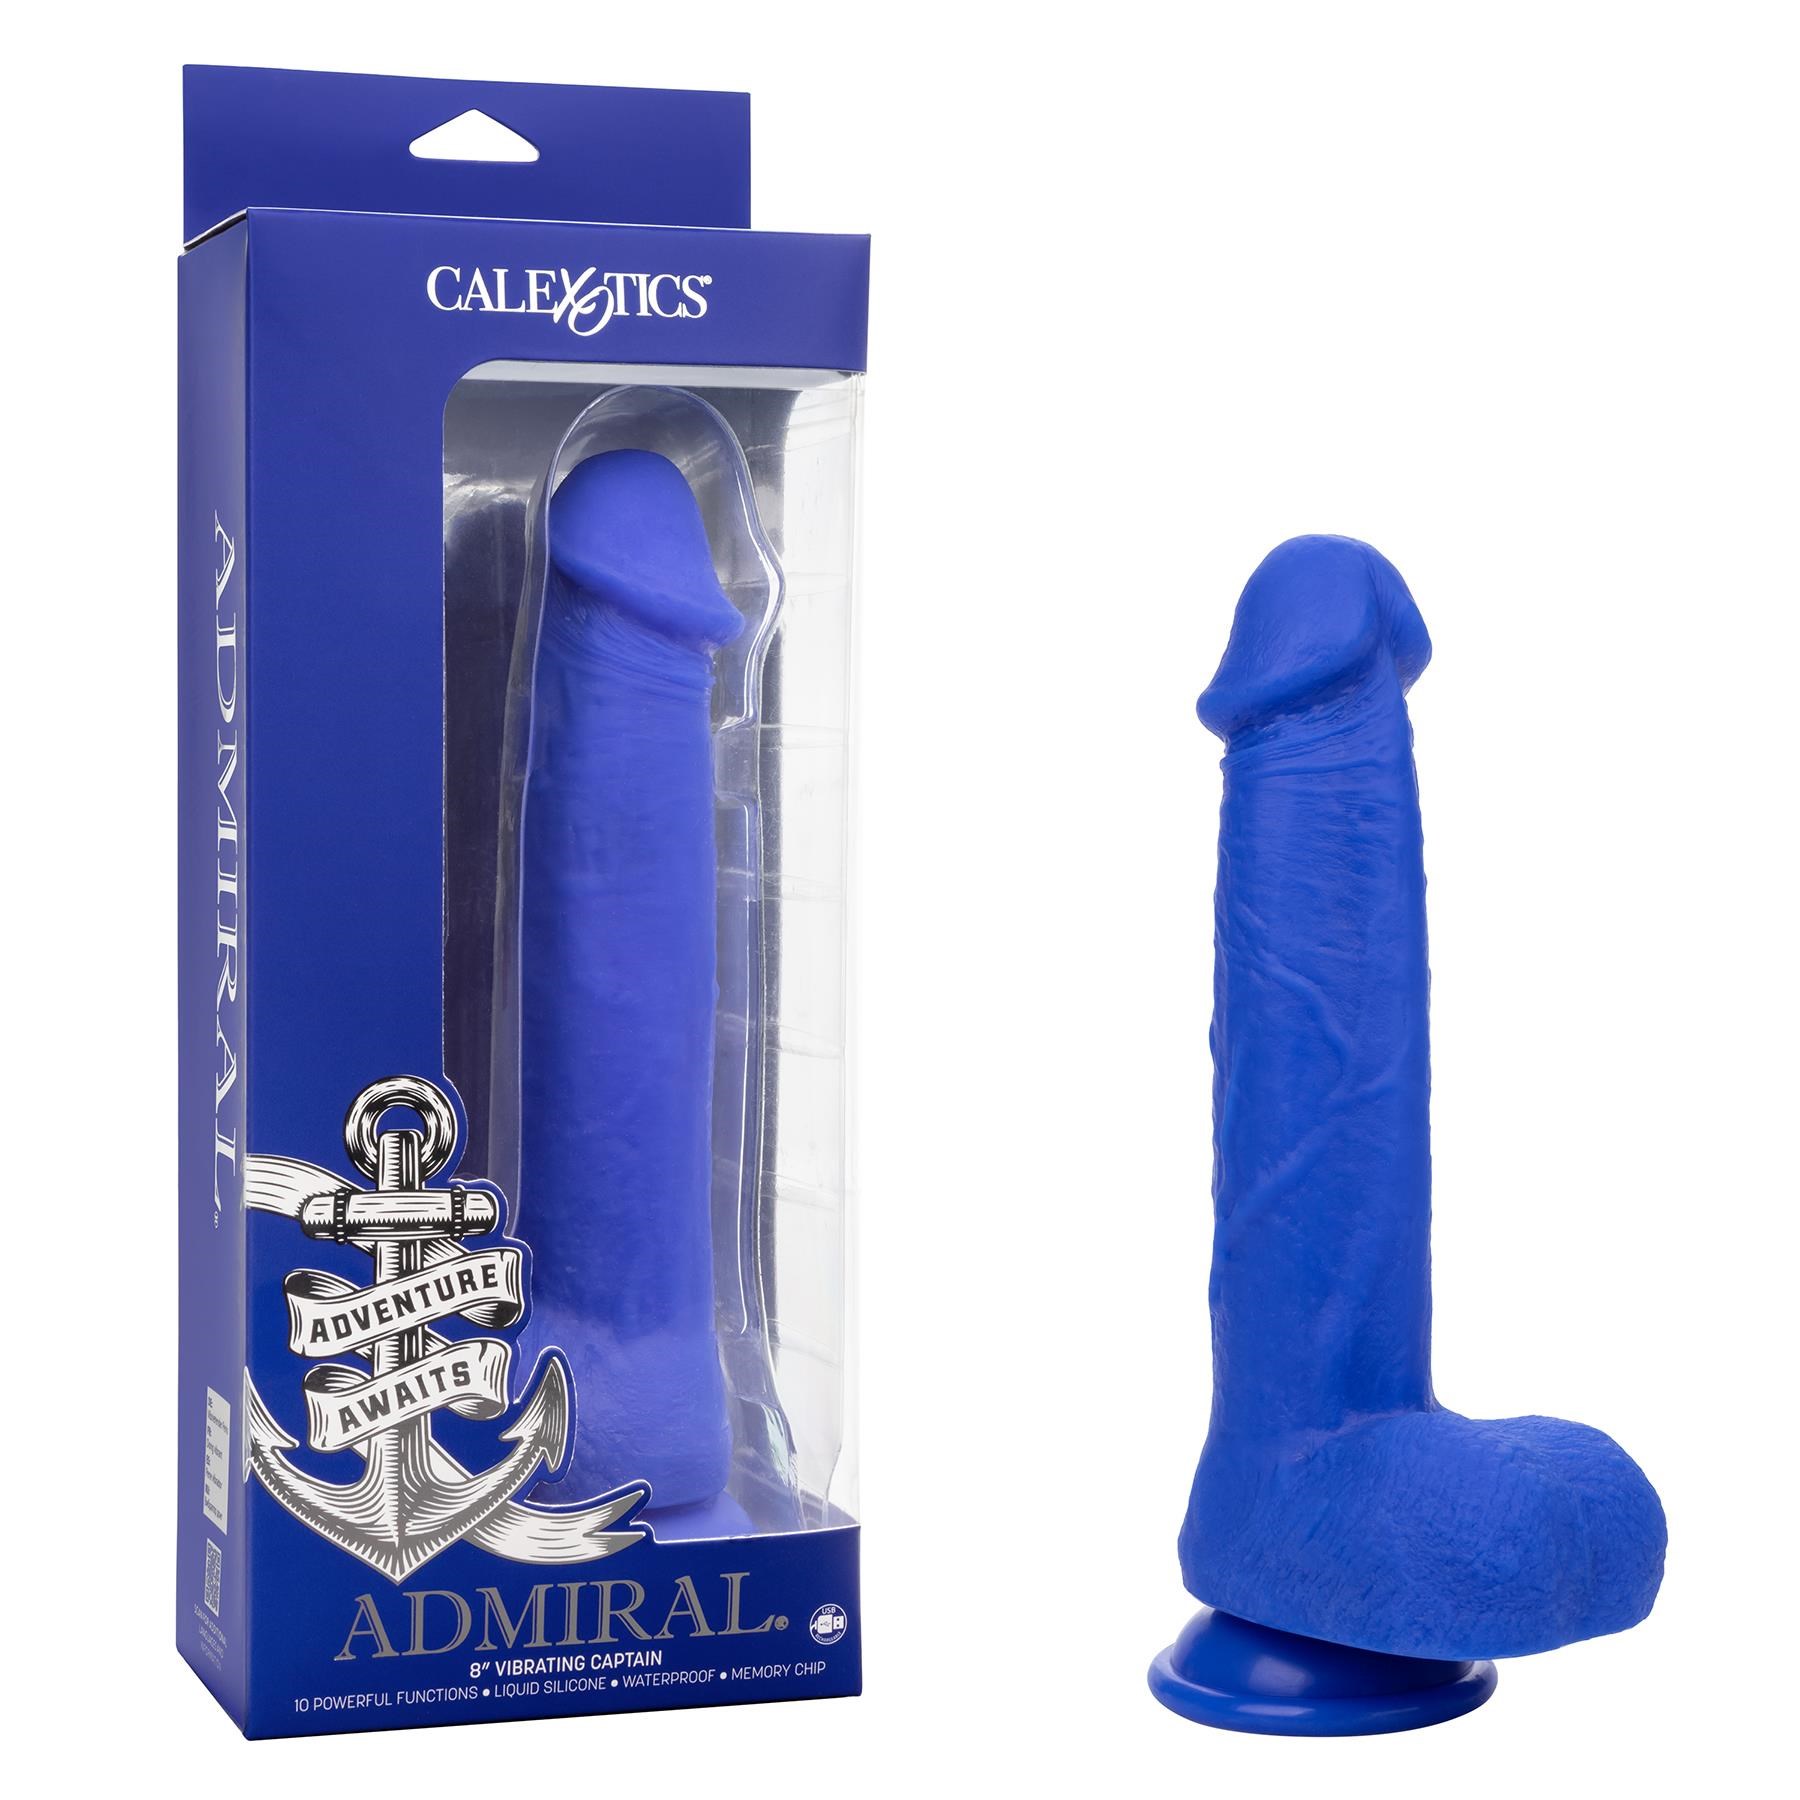 Admiral 8 Inch Vibrating Captain Dildo - Product and Packaging